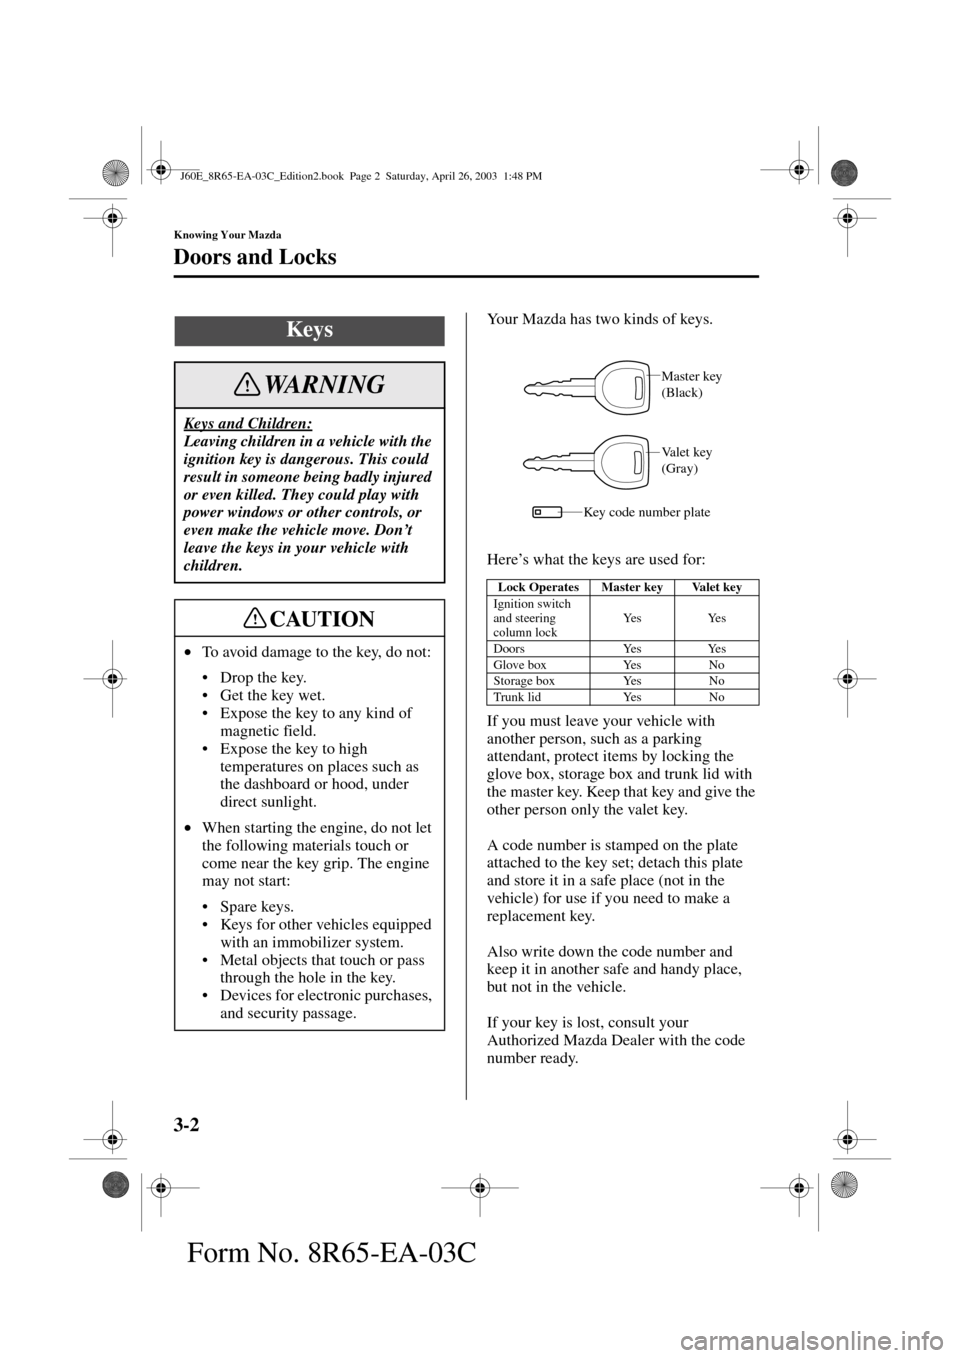 MAZDA MODEL RX 8 2004  Owners Manual (in English) 3-2
Knowing Your Mazda
Form No. 8R65-EA-03C
Doors and Locks
Your Mazda has two kinds of keys.
Here’s what the keys are used for:
If you must leave your vehicle with 
another person, such as a parkin